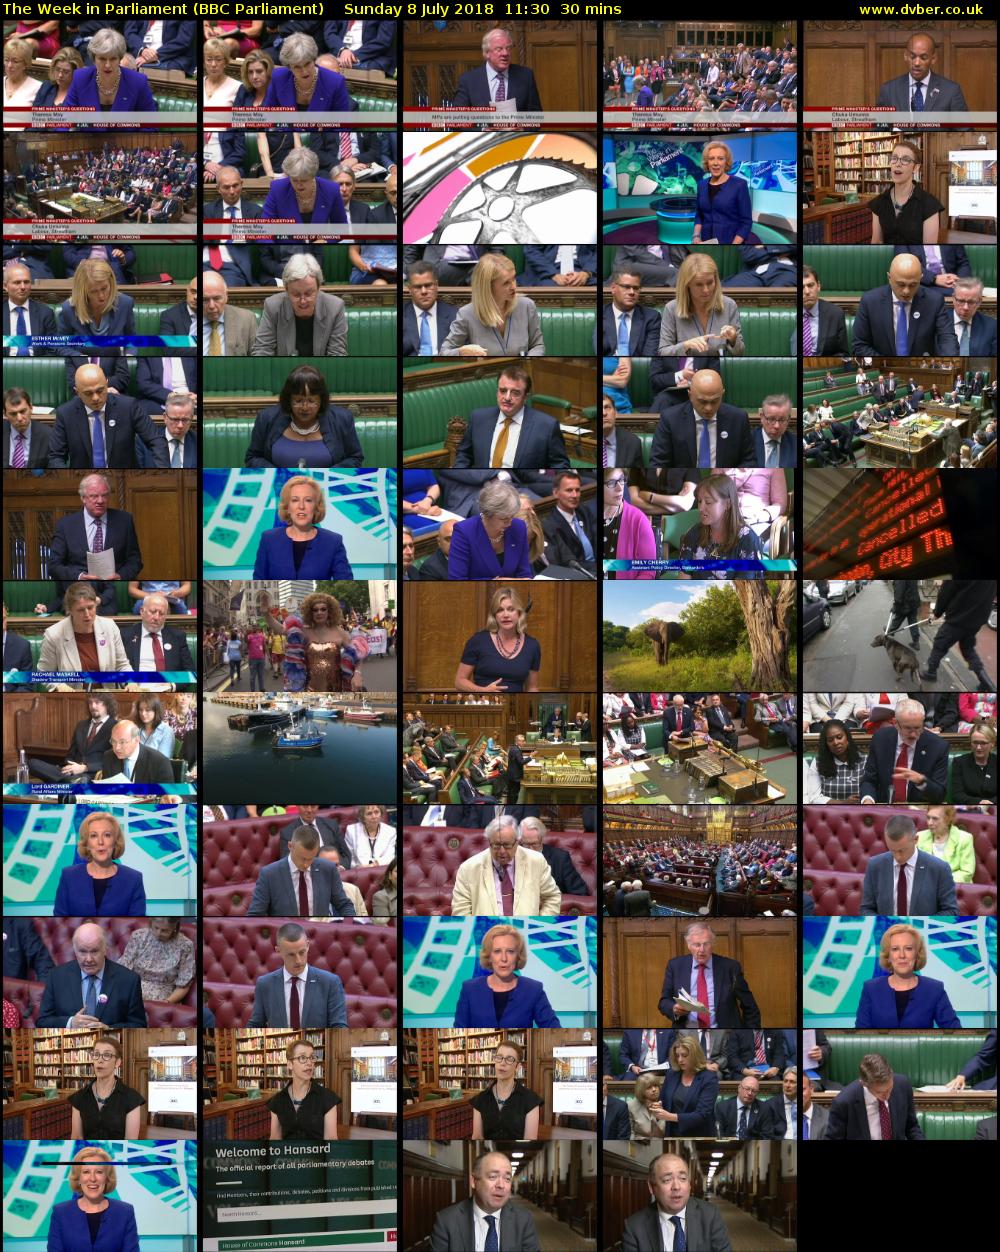 The Week in Parliament (BBC Parliament) Sunday 8 July 2018 11:30 - 12:00